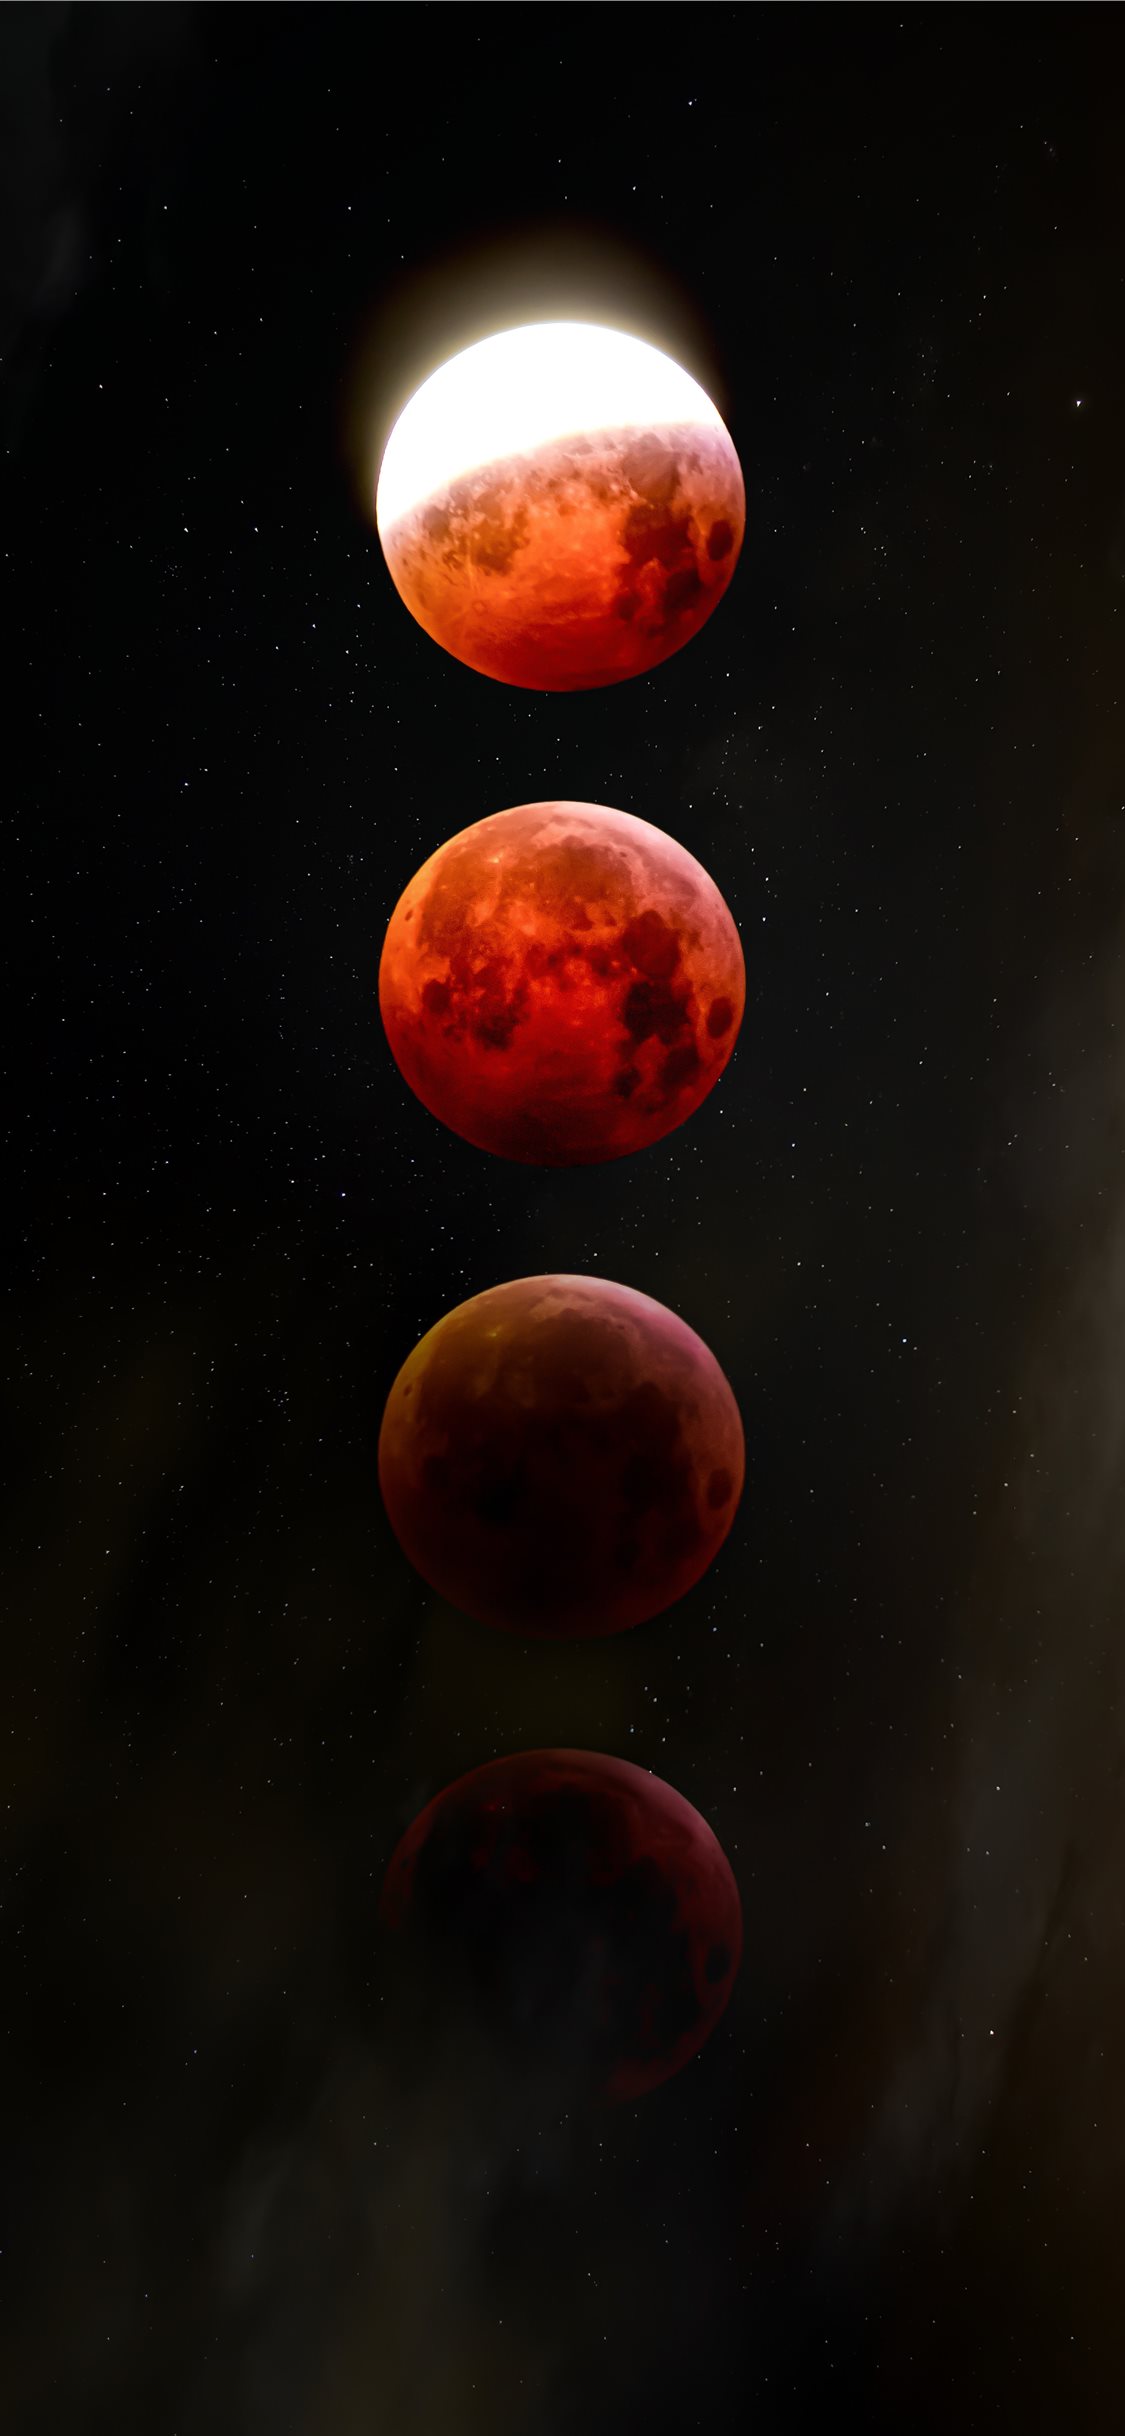 lunar eclipse 1080P 2k 4k HD wallpapers backgrounds free download   Rare Gallery